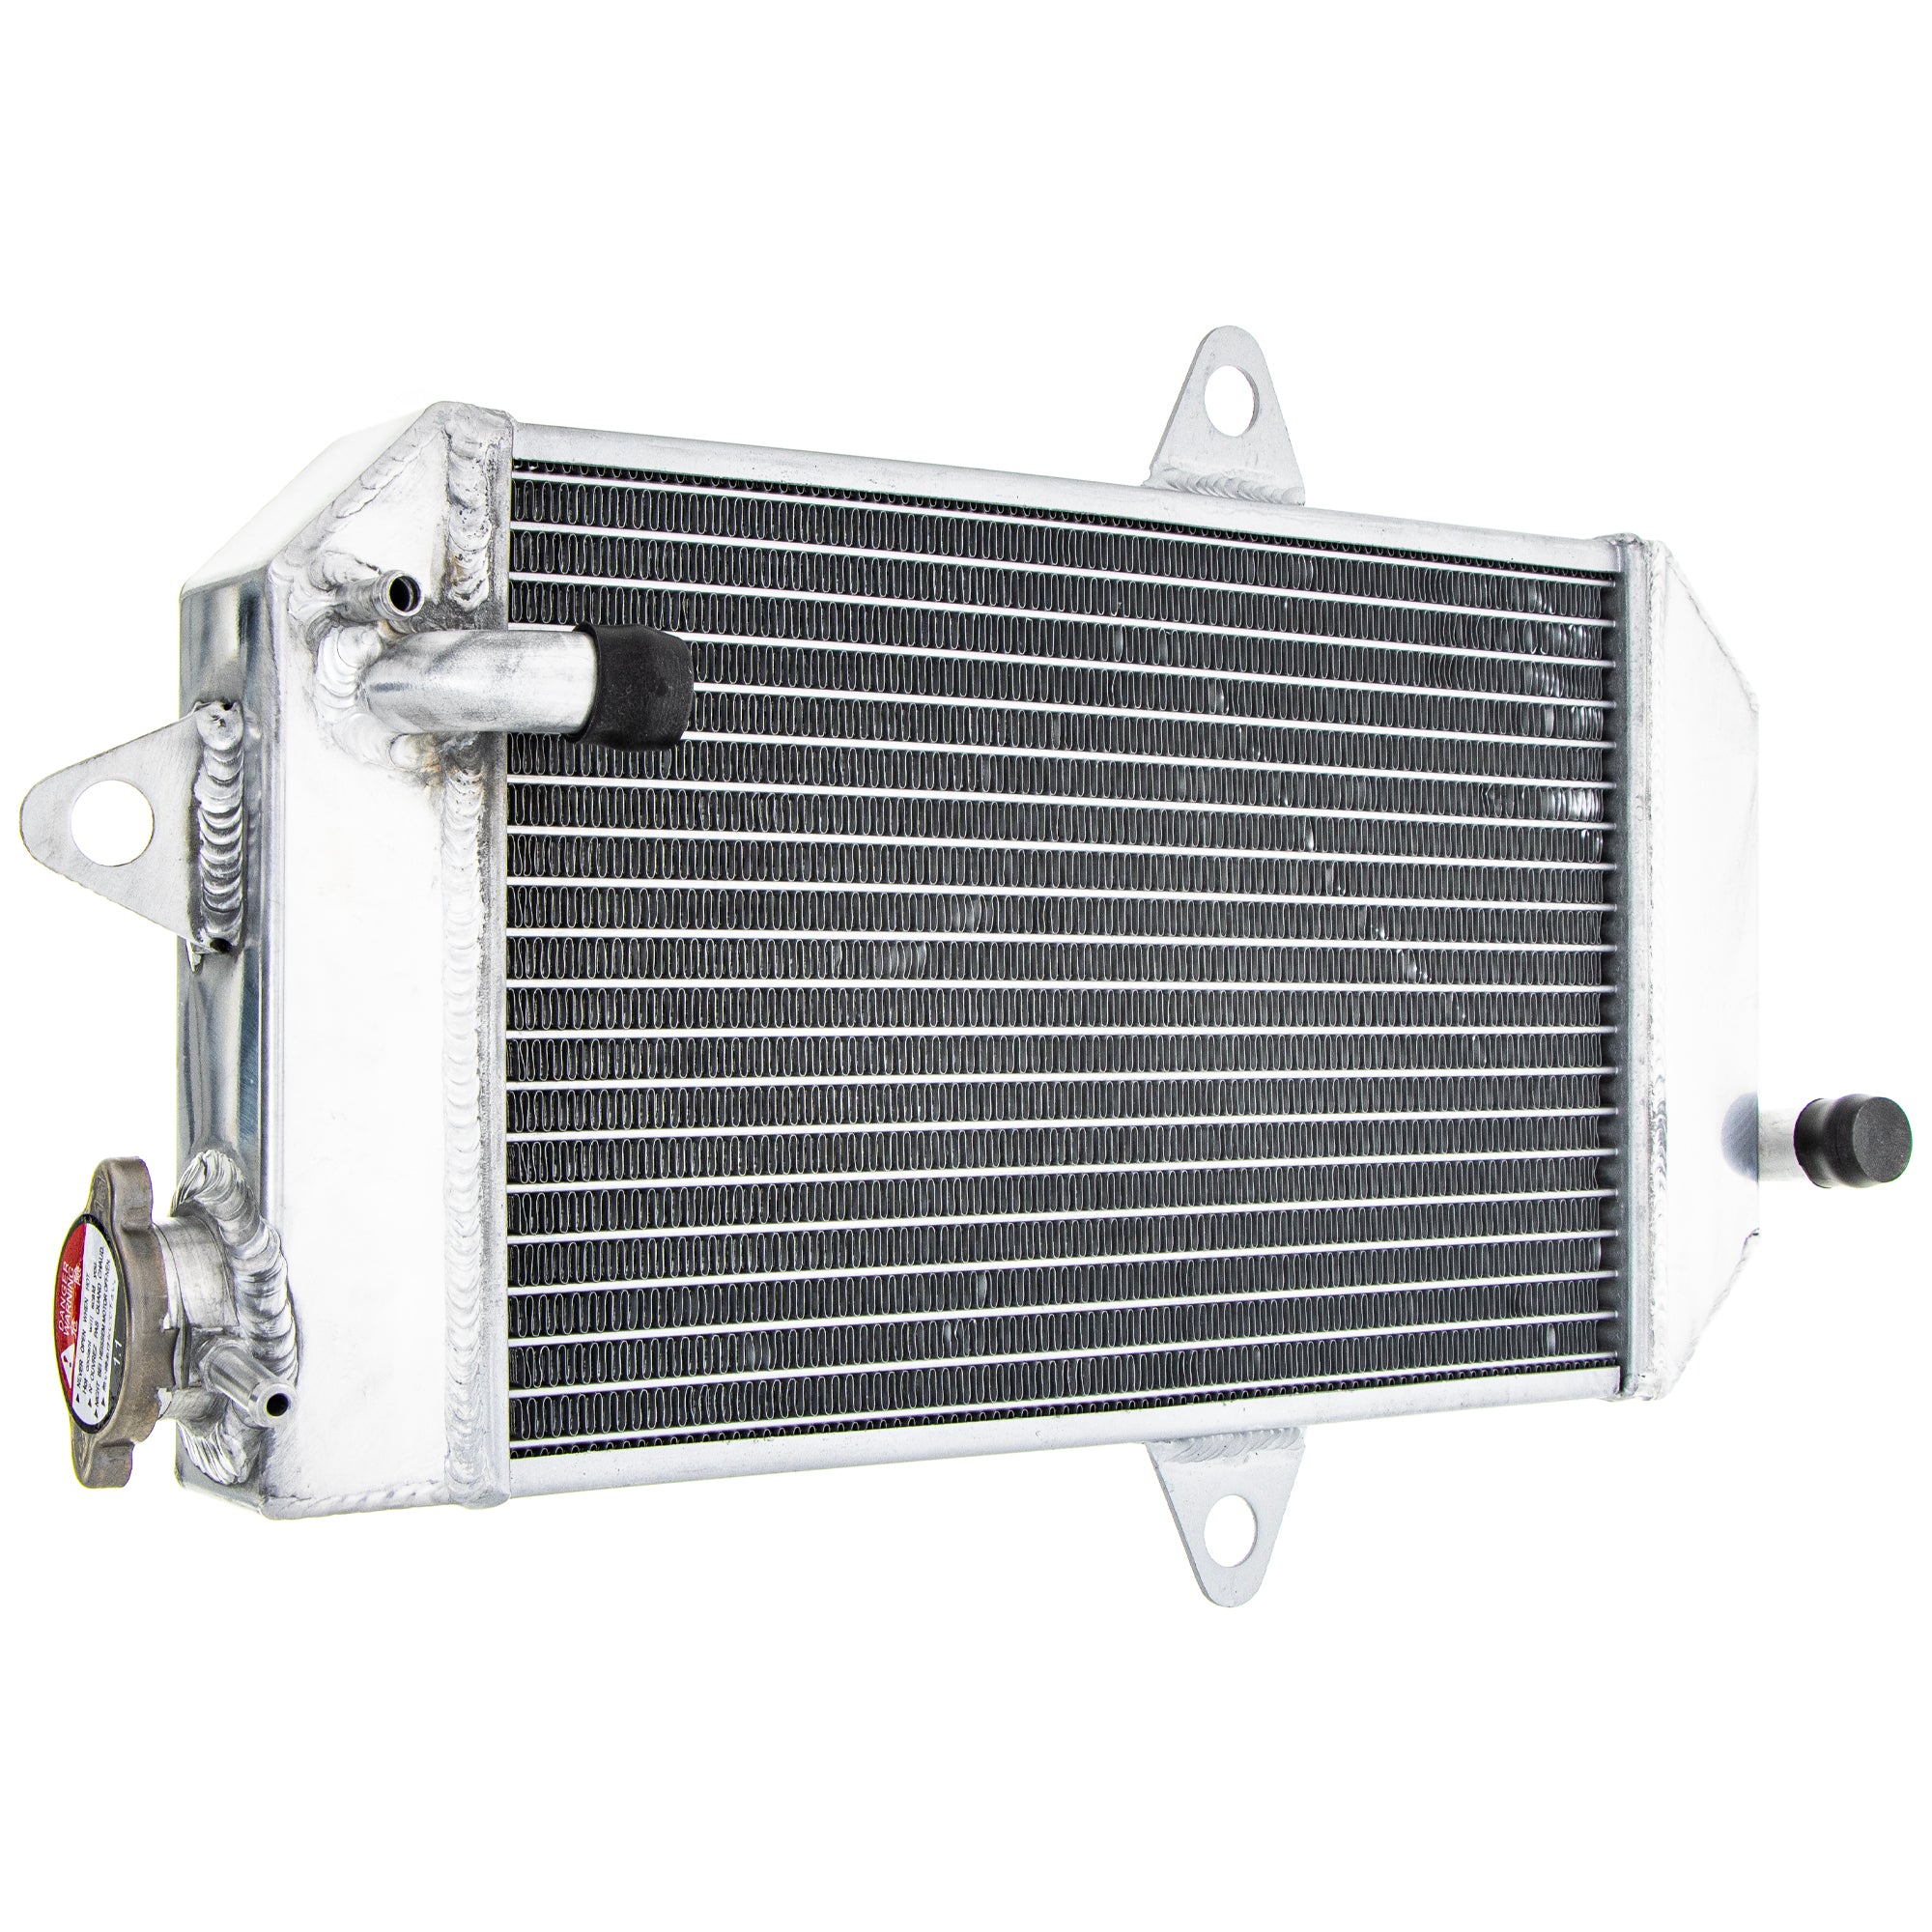 High Capacity Radiator for zOTHER Banshee NICHE 519-CRD2225A